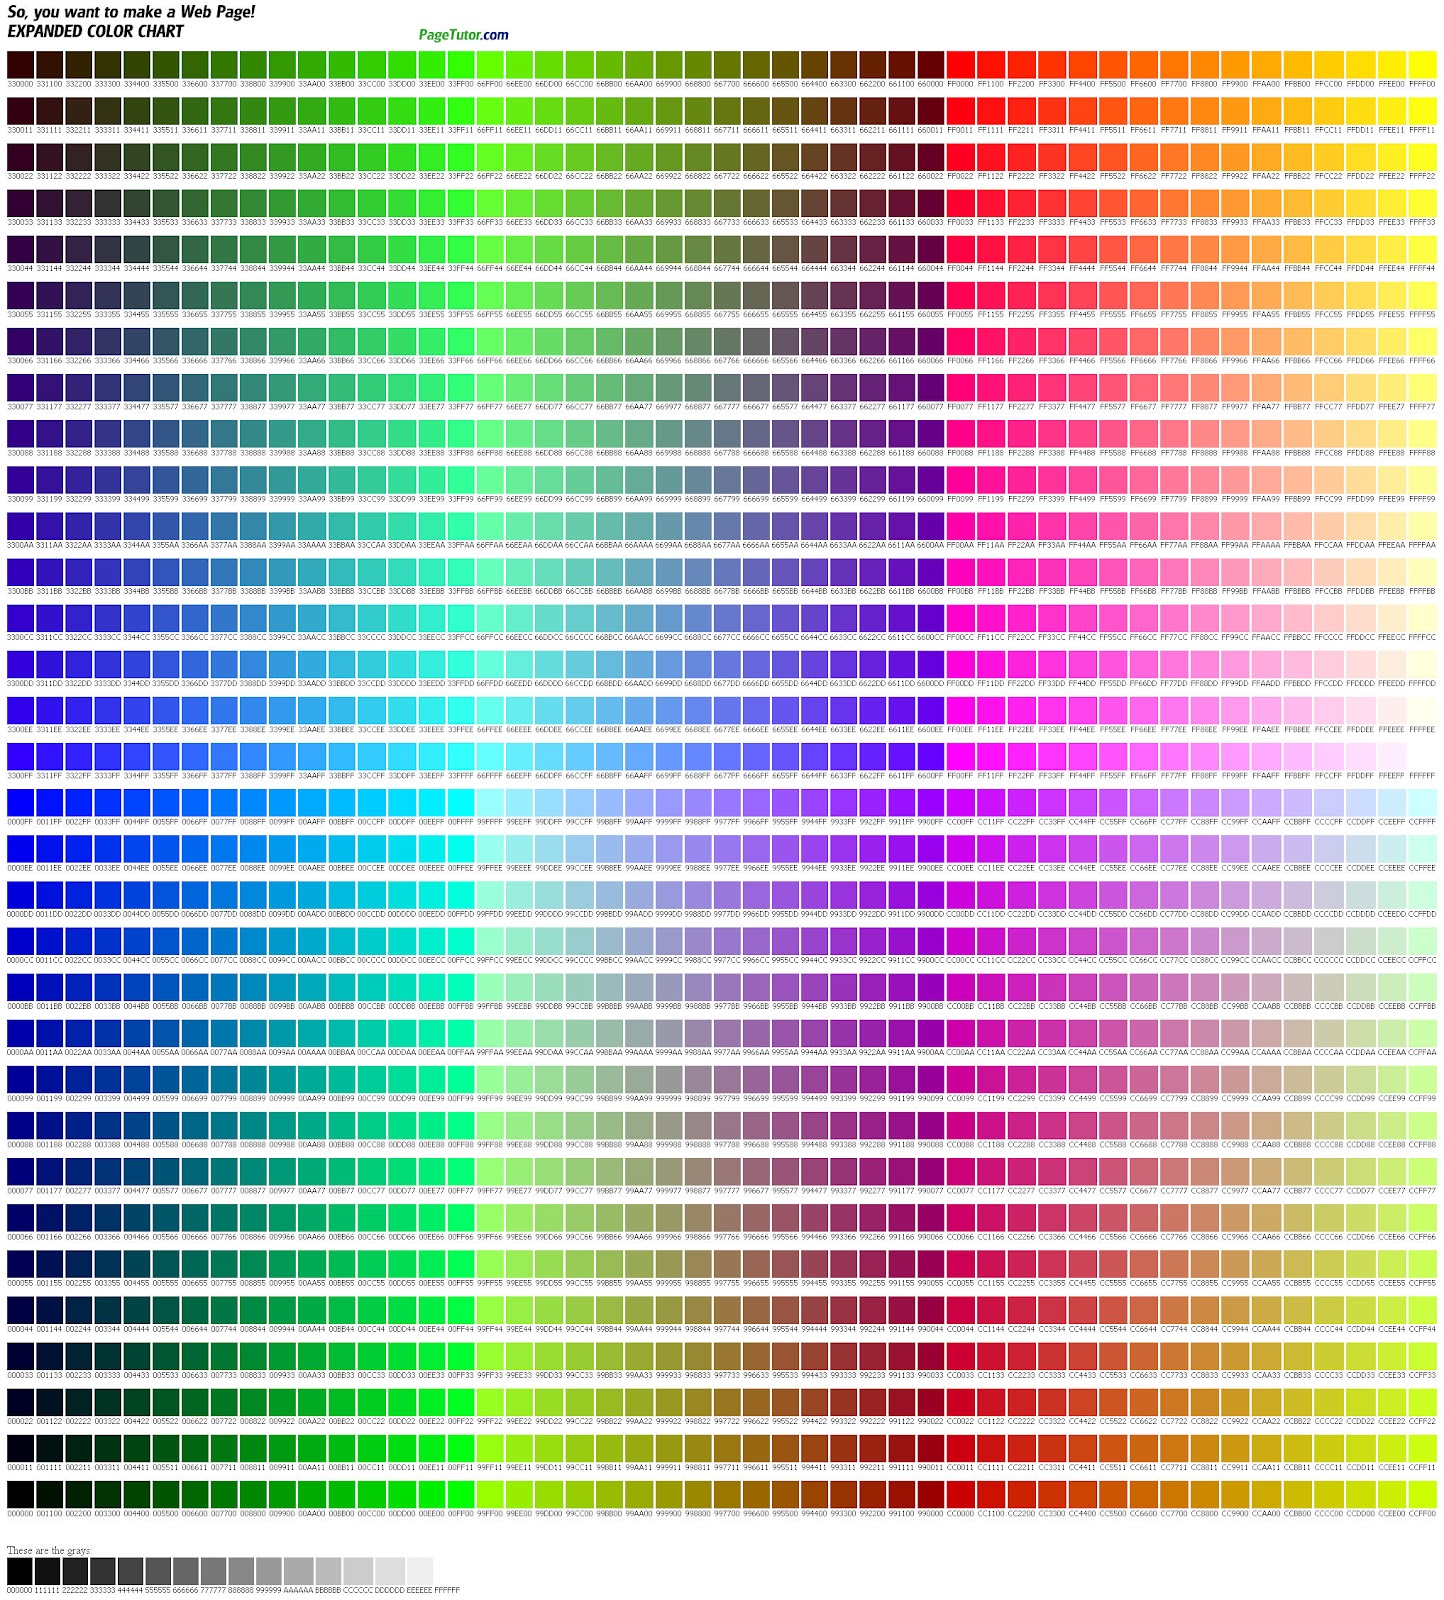 Hex Color Codes Bing Images Coloring Wallpapers Download Free Images Wallpaper [coloring654.blogspot.com]